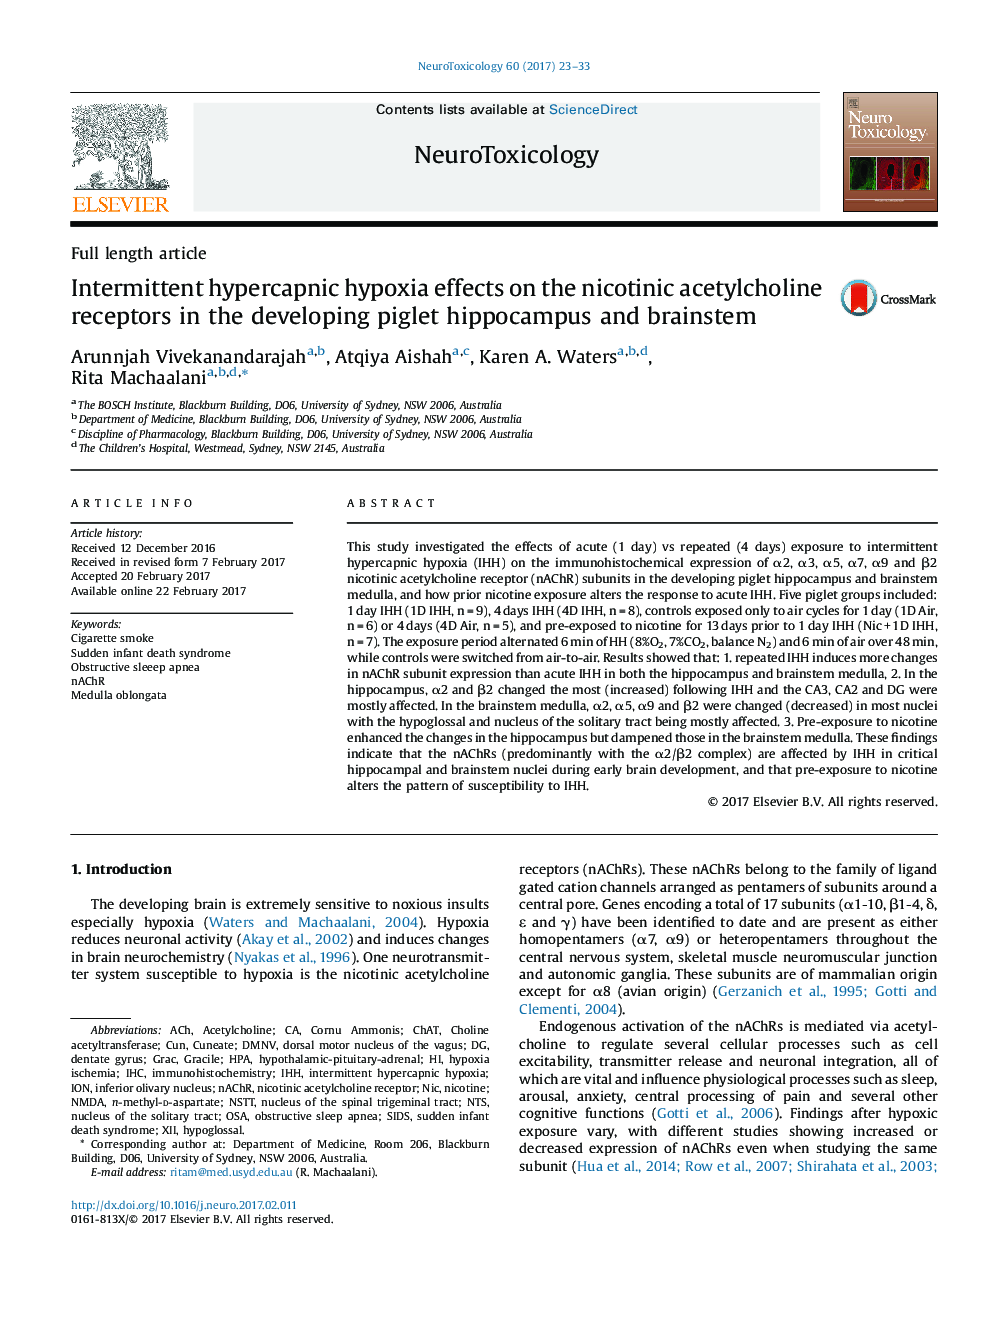 Intermittent hypercapnic hypoxia effects on the nicotinic acetylcholine receptors in the developing piglet hippocampus and brainstem